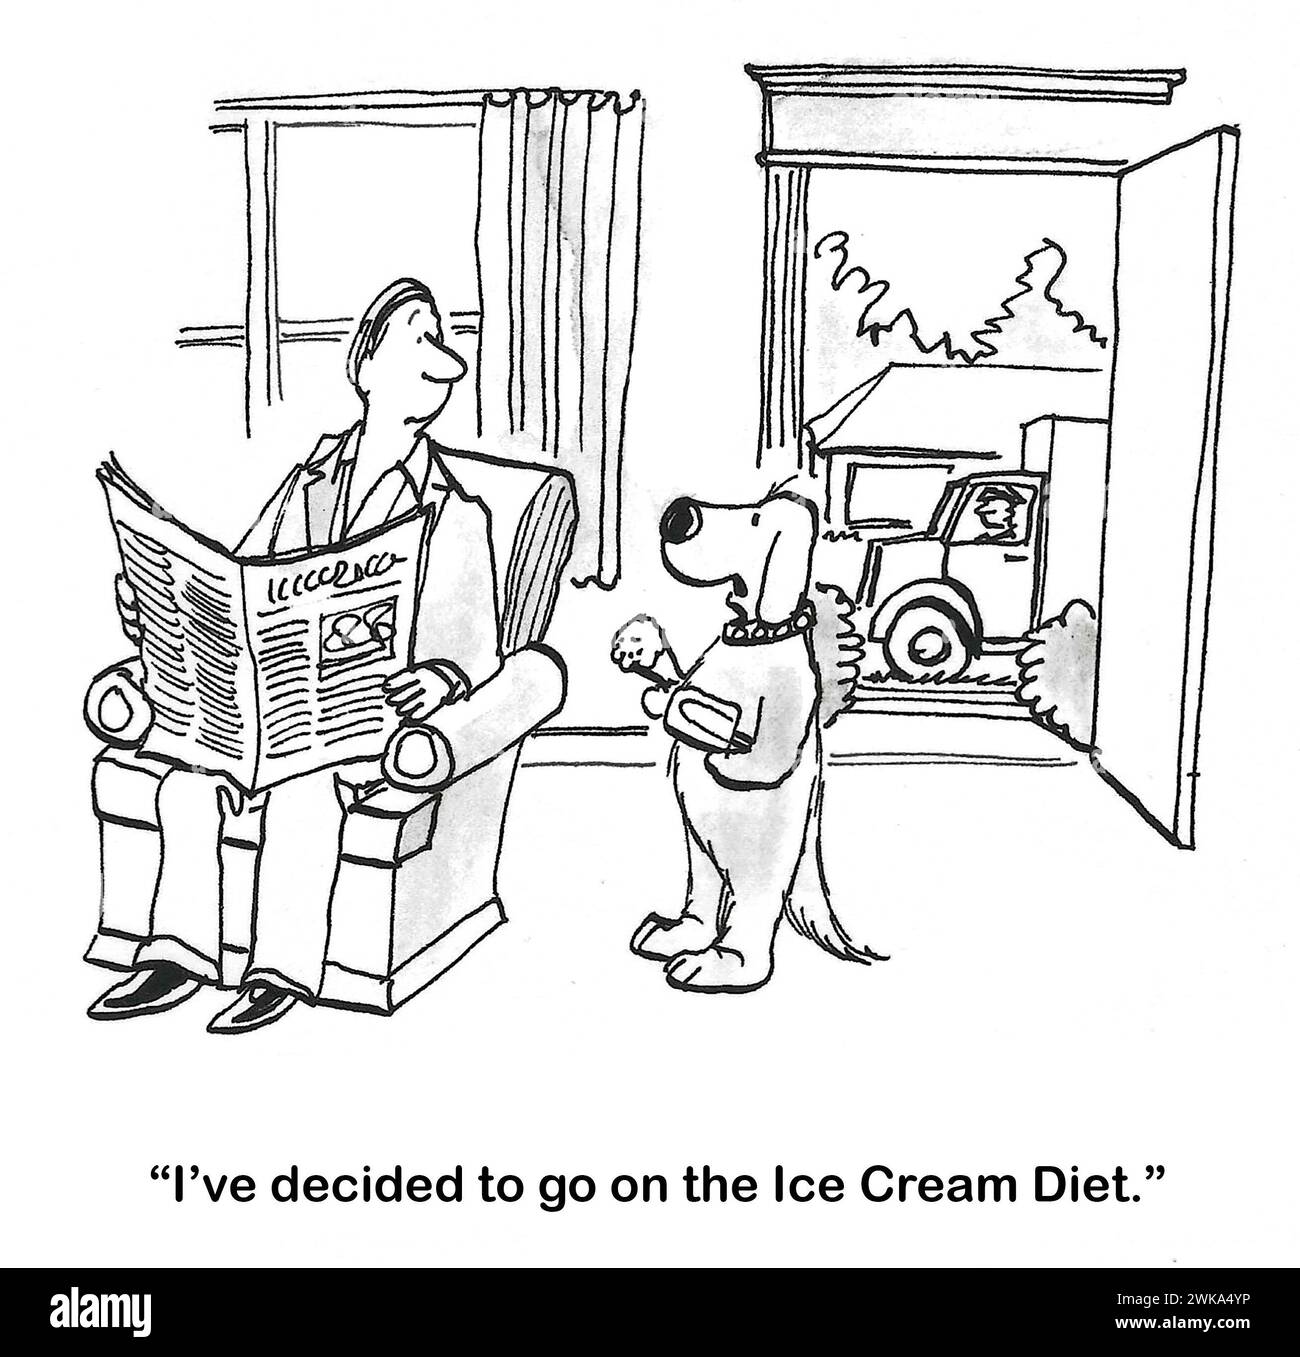 BW cartoon of a family dog telling its owner it has decided to go on an ice cream diet, as the dog holds a popsicle and ice cream cone. Stock Photo